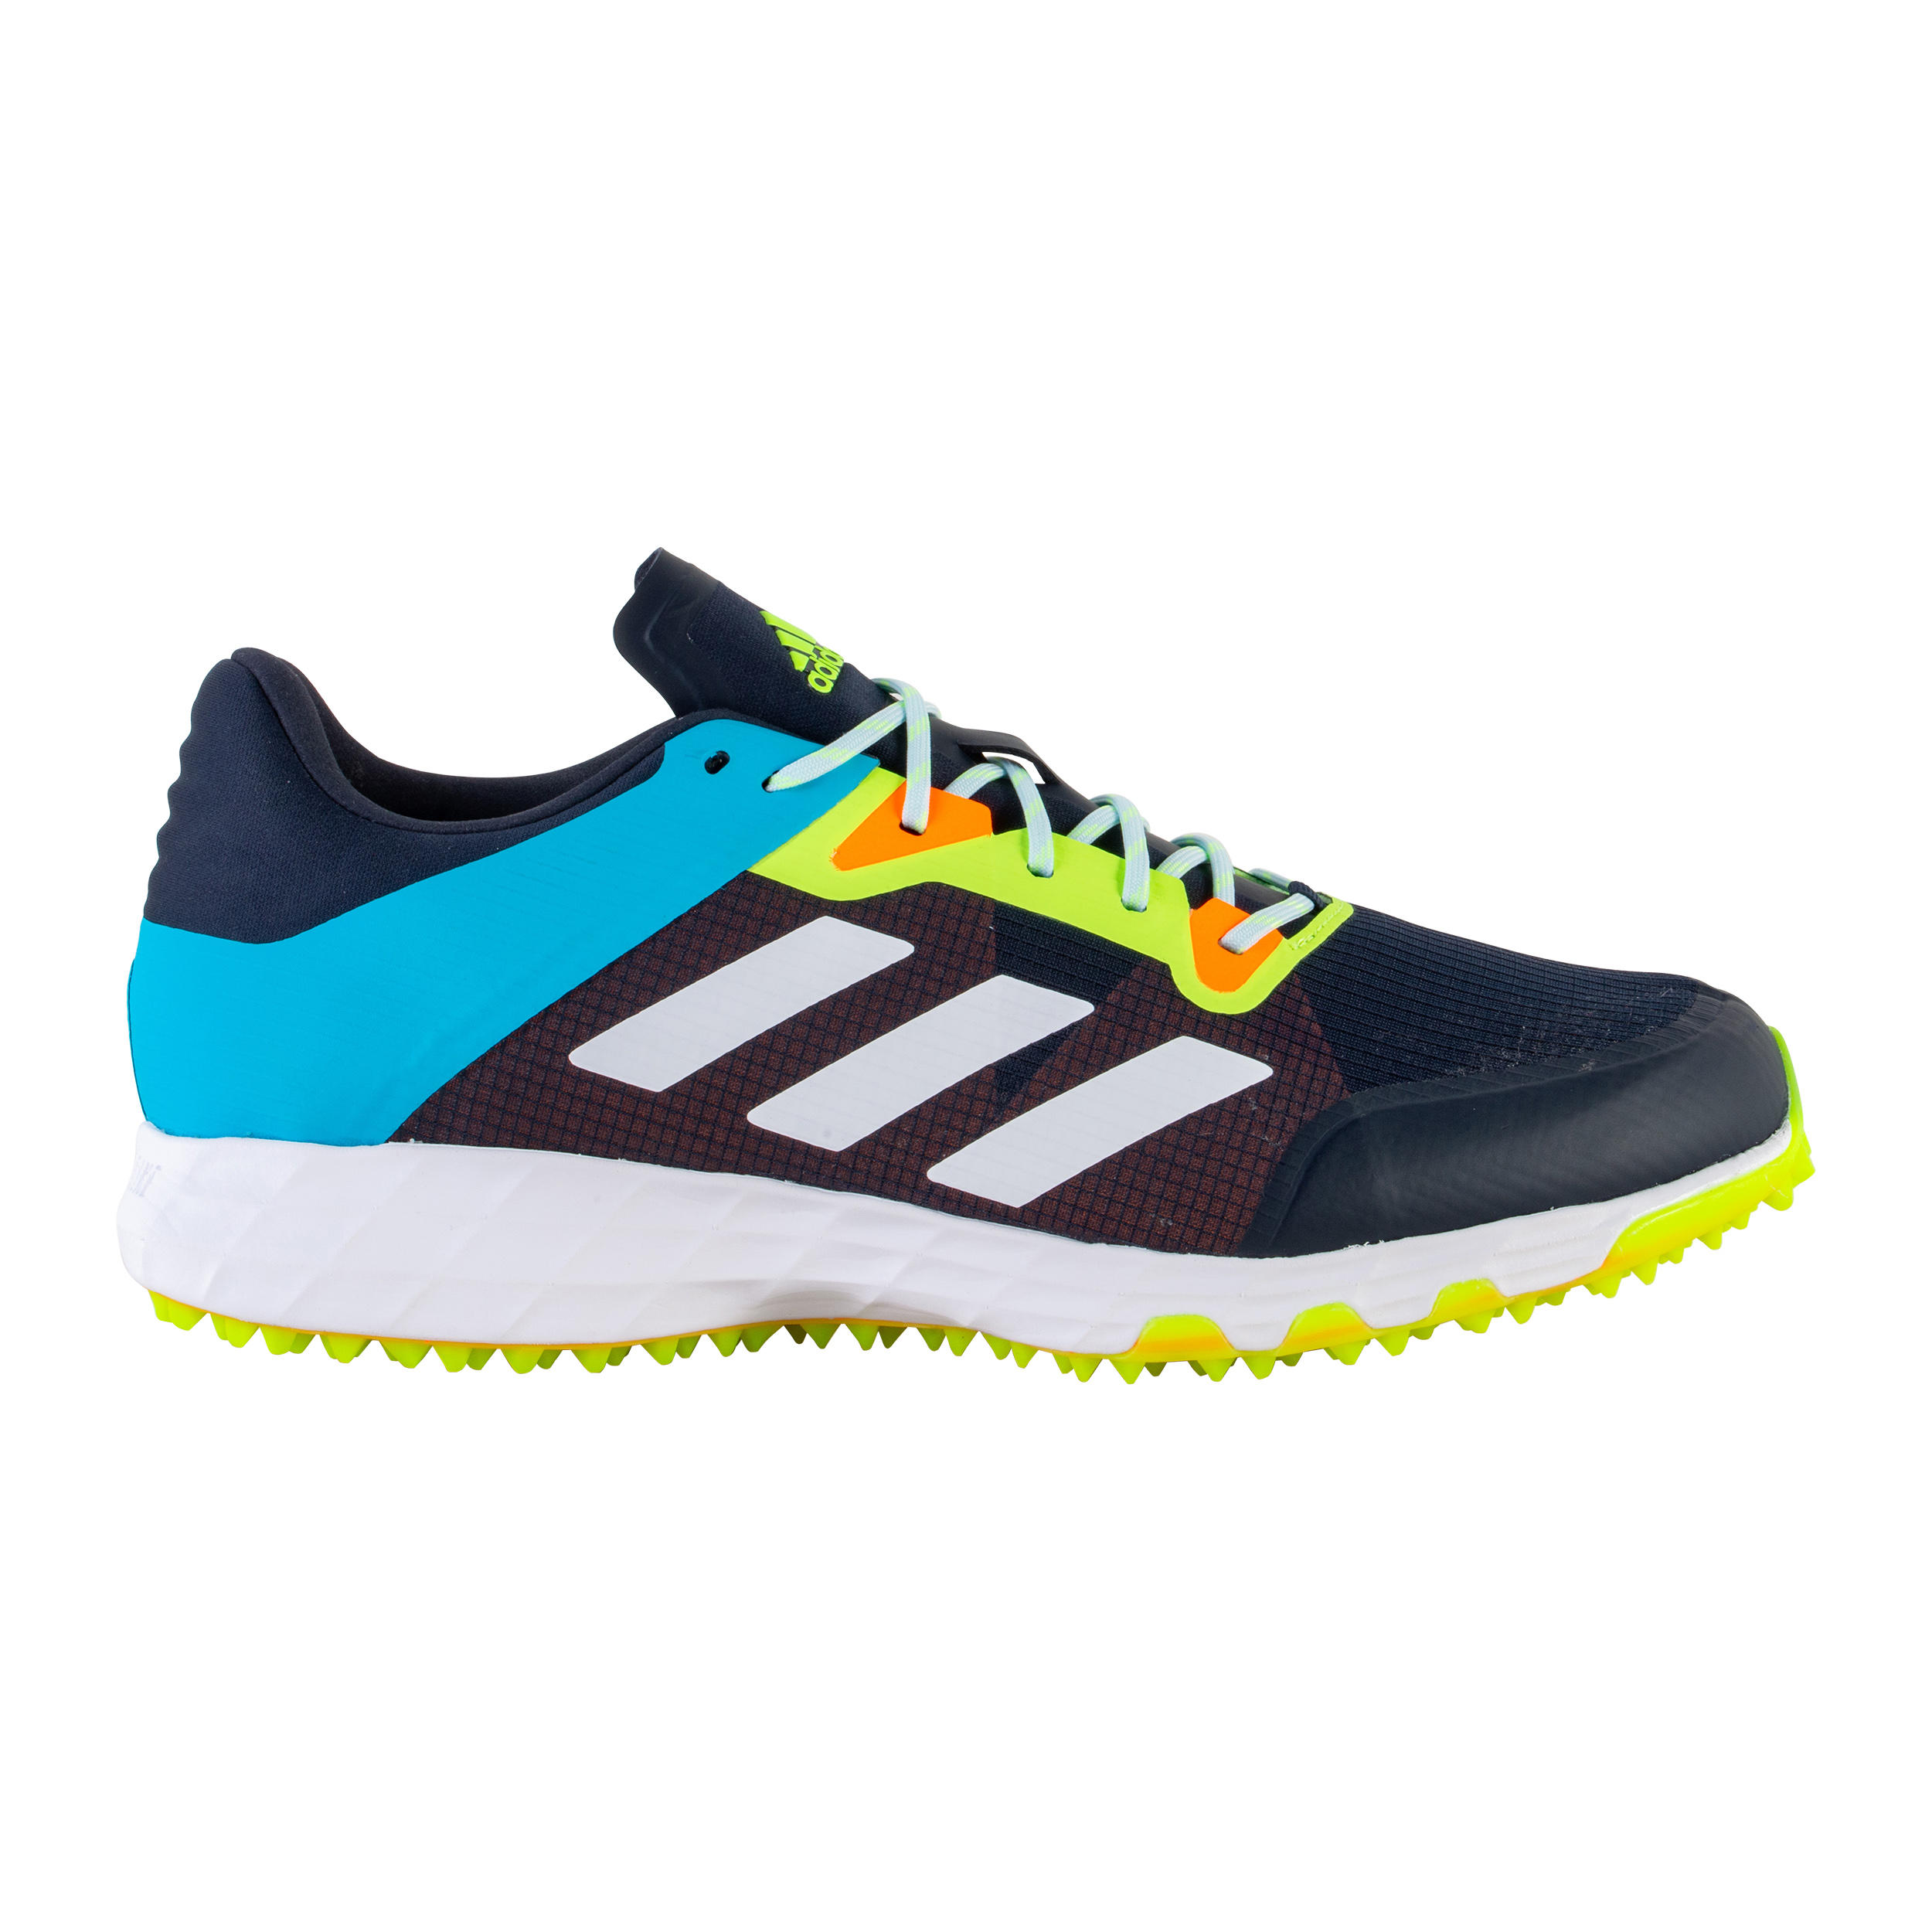 Adult High-Intensity Field Hockey Shoes 